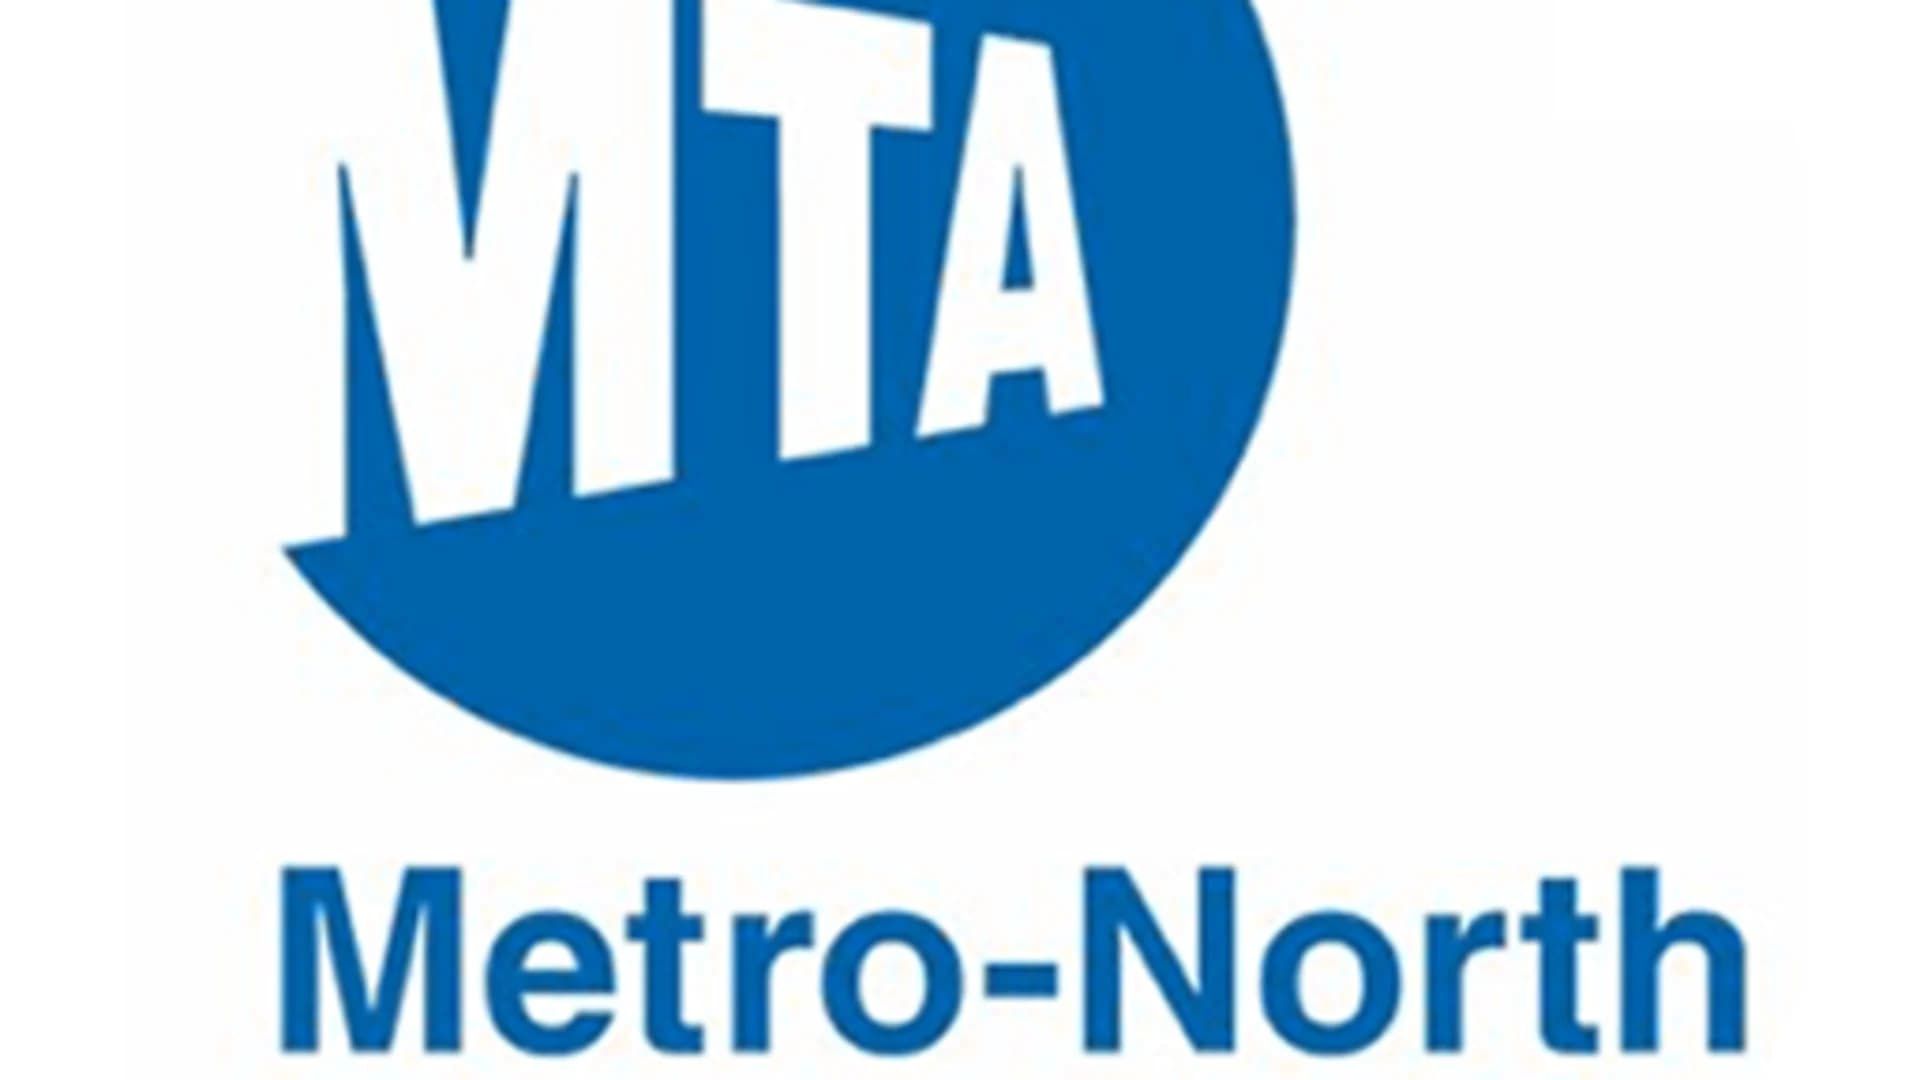 Metro-North Railroad: Access to Grand Central Station limited Friday evening due to demonstrations